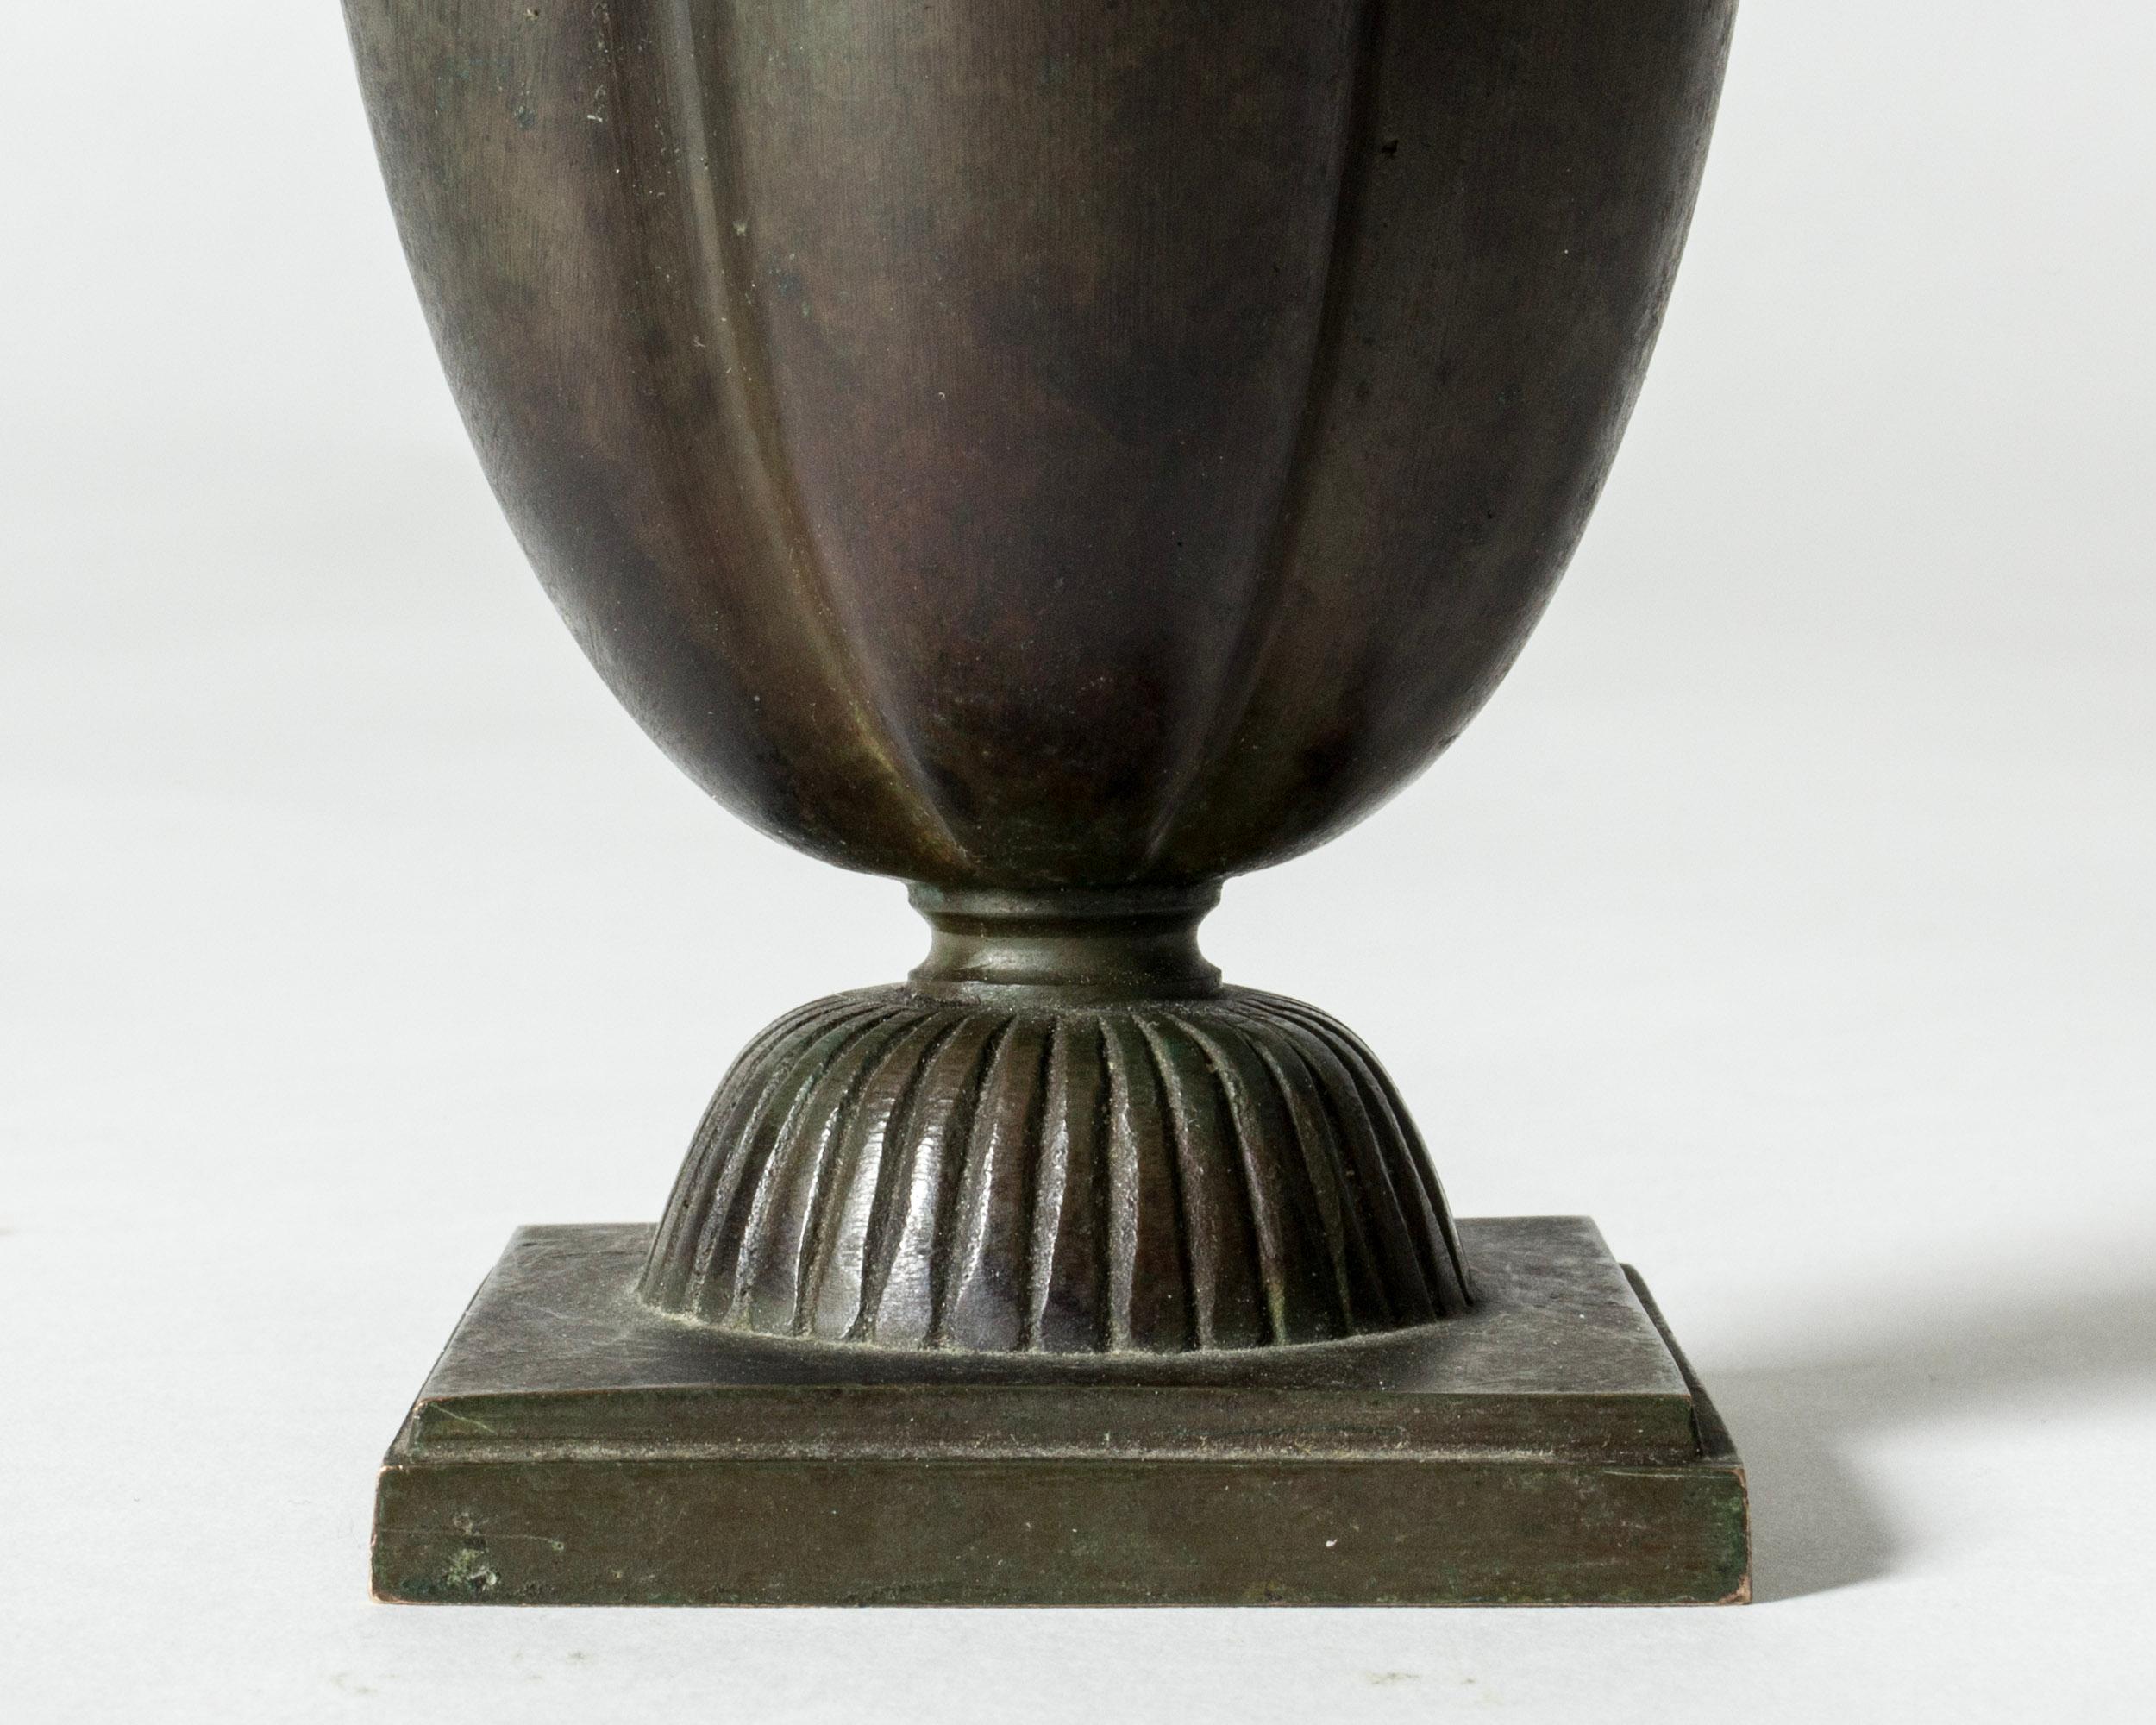 Beautiful 1930s bronze vase, hand cast at Guldsmedsaktiebolaget, GAB, and finished with moss green patina.

GAB was founded in Stockholm in 1867 and was an important influence on the Swedish art and crafts and industrial design scenes for more than